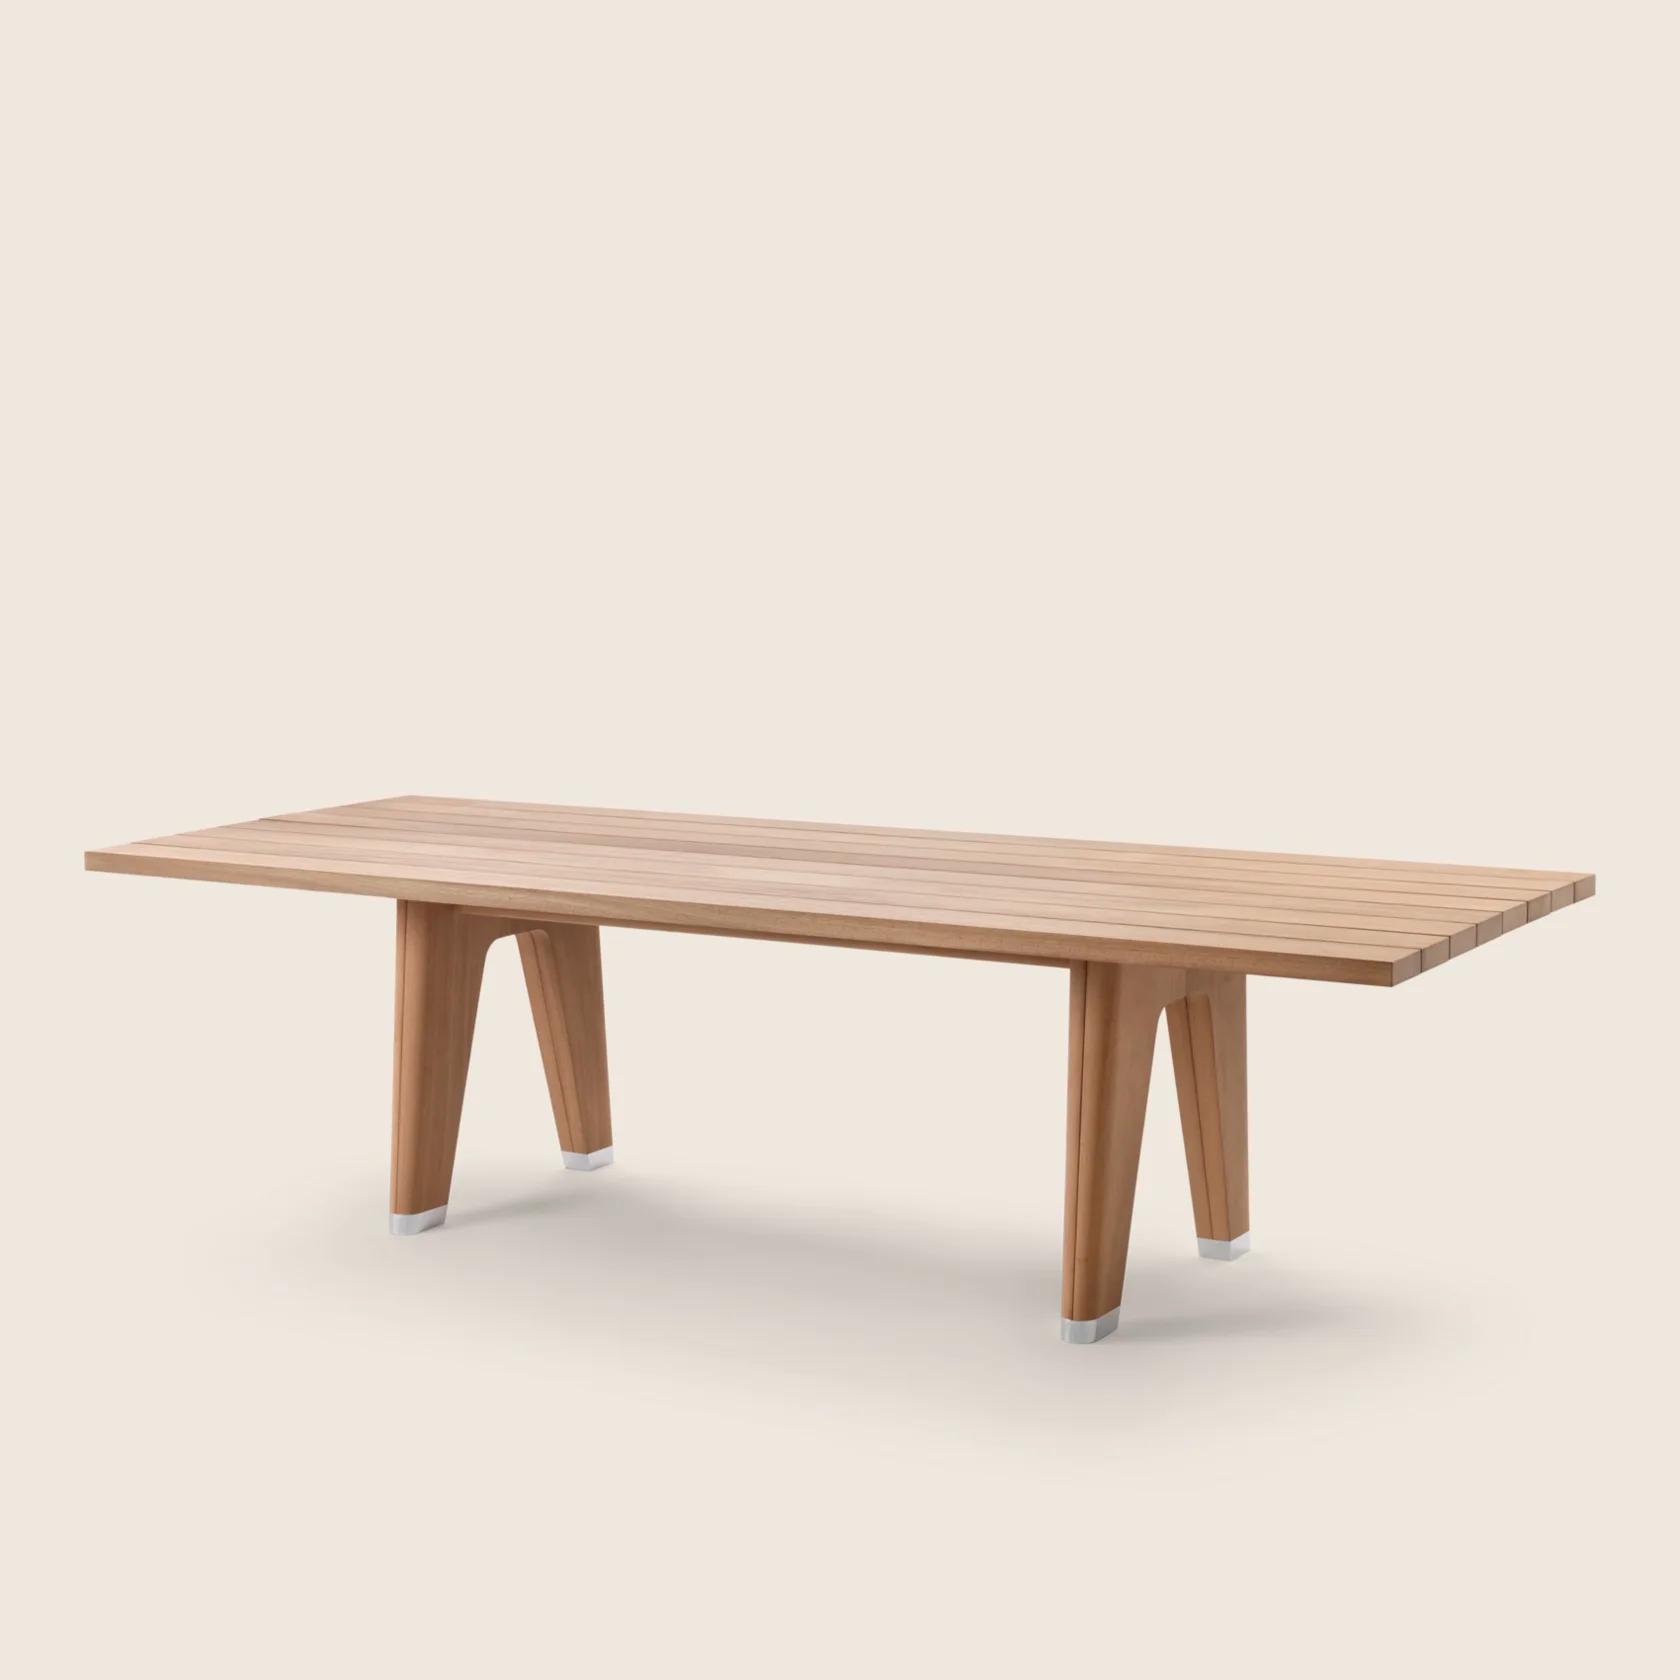 0240L0_MONREALE OUTDOOR_TABLE_02.png